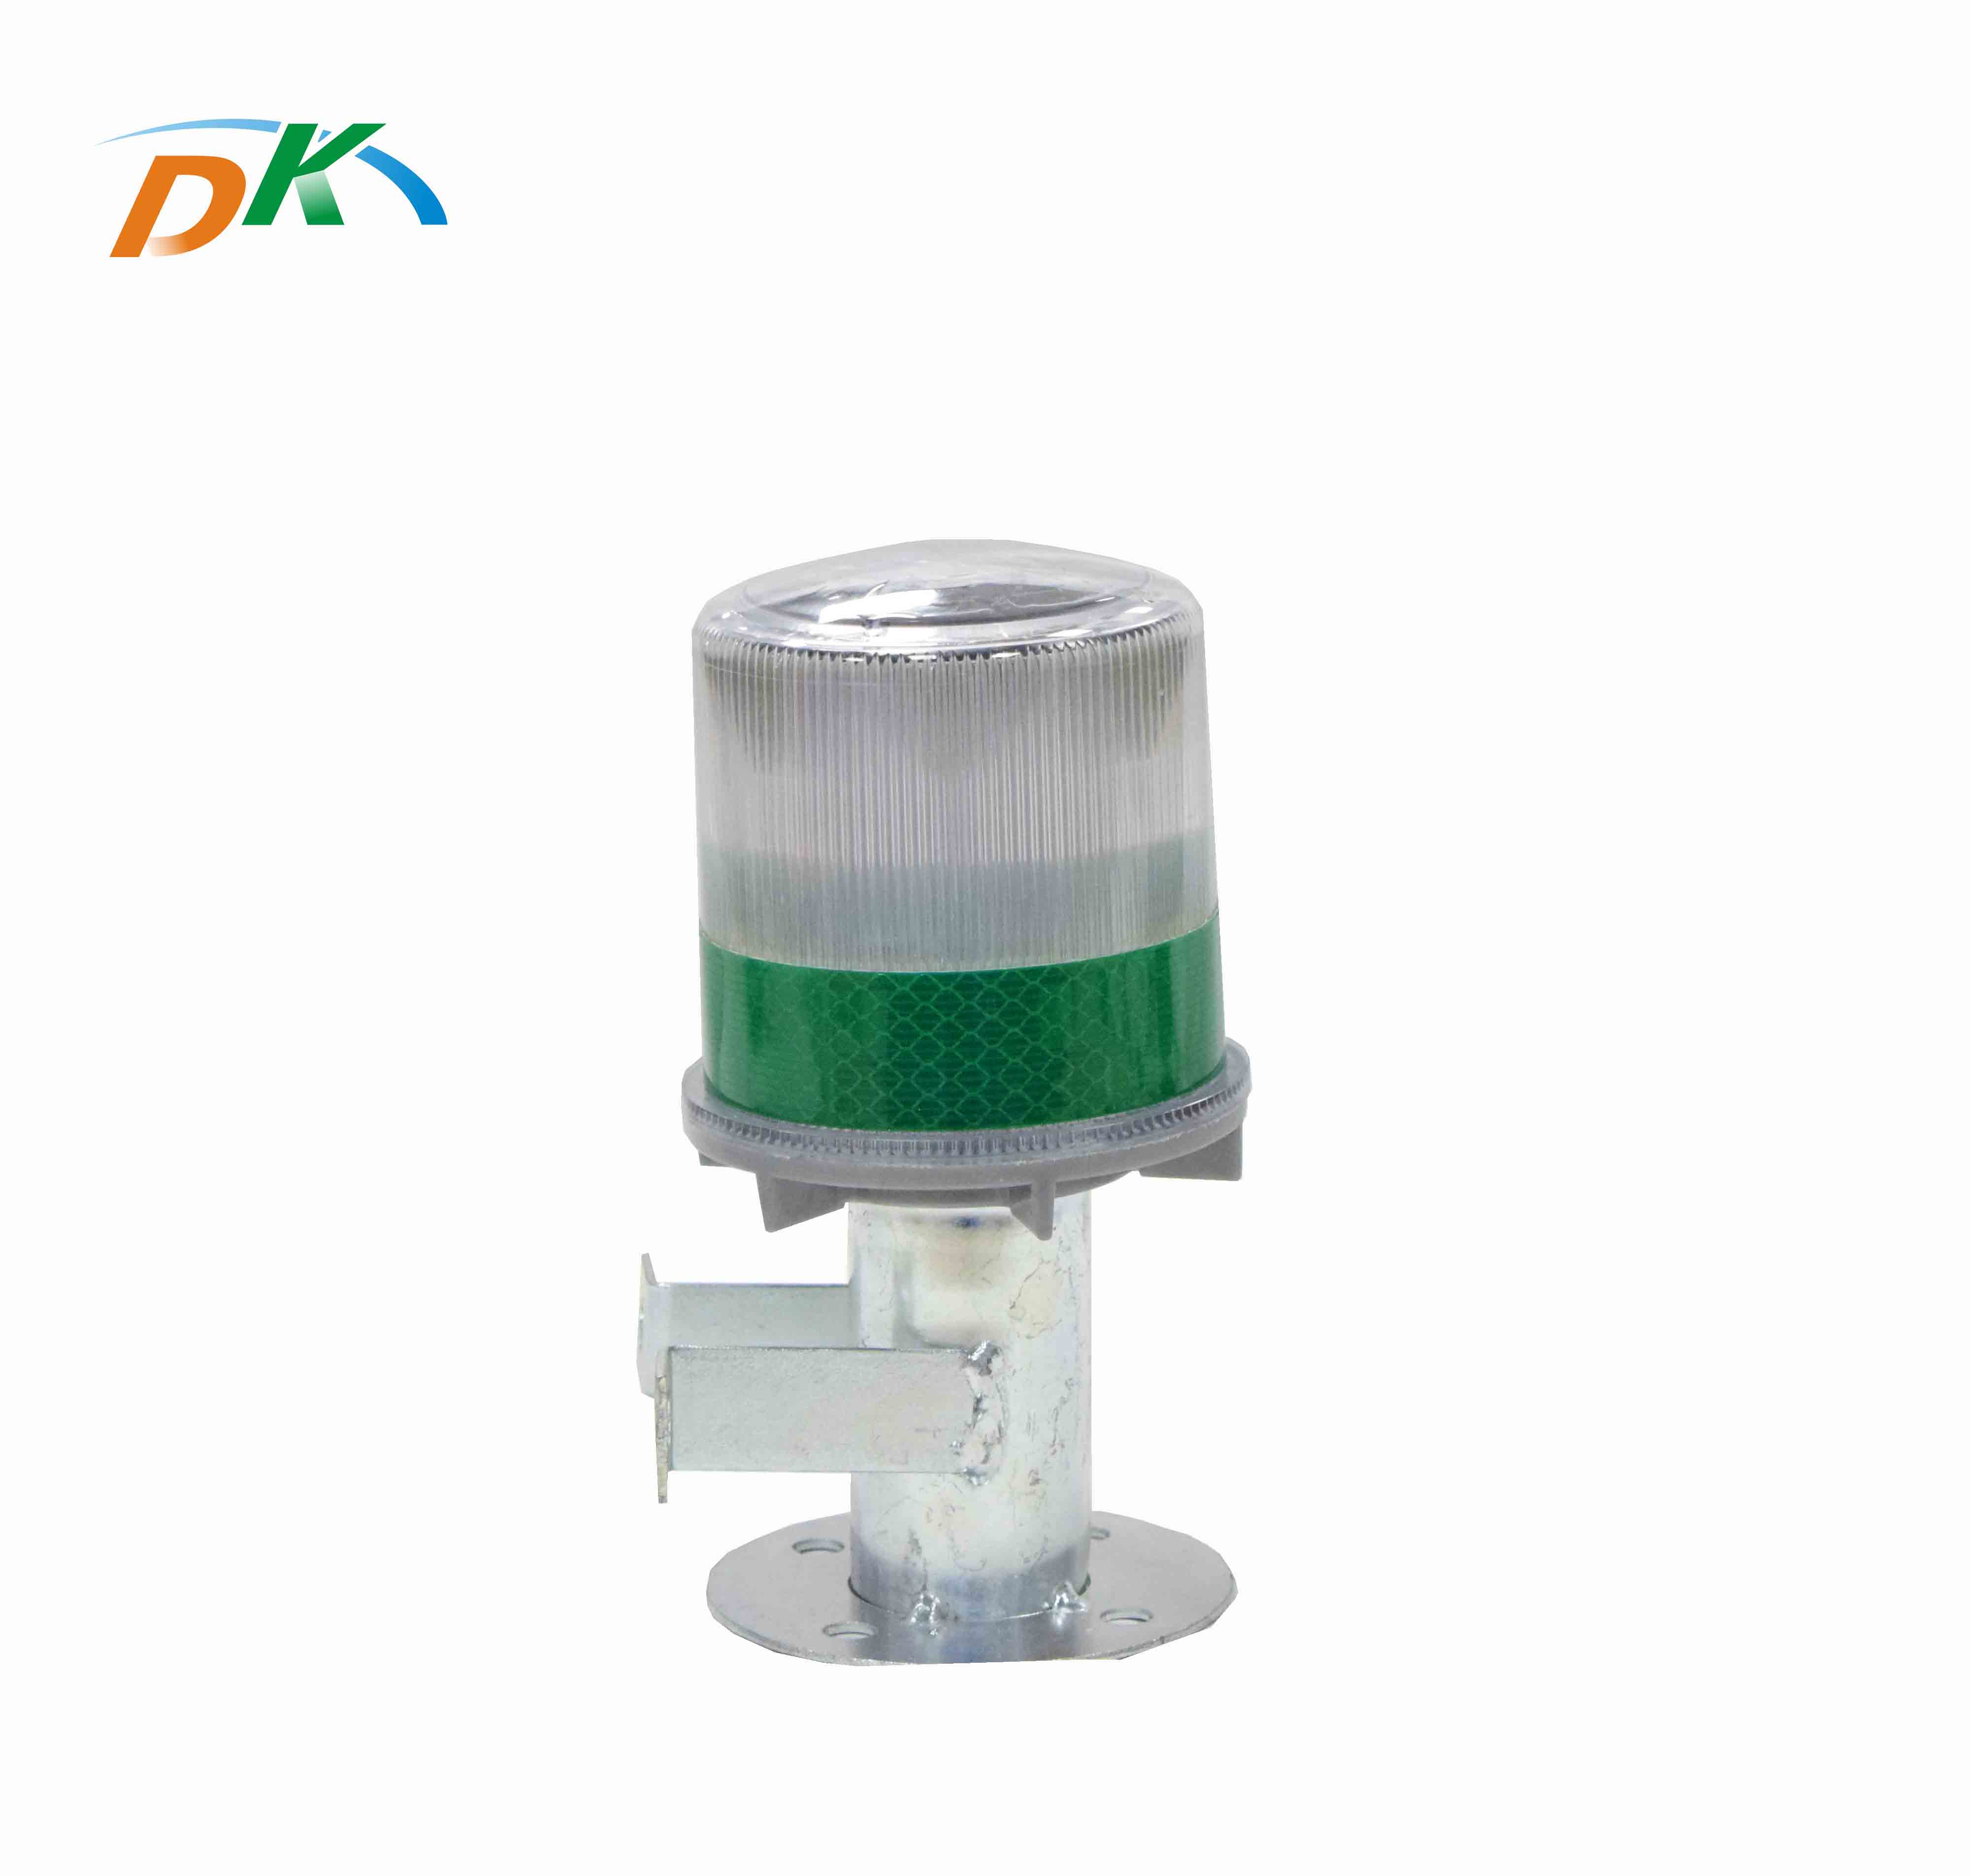 DK PC material rechargeable solar traffic cone light for roadway safety